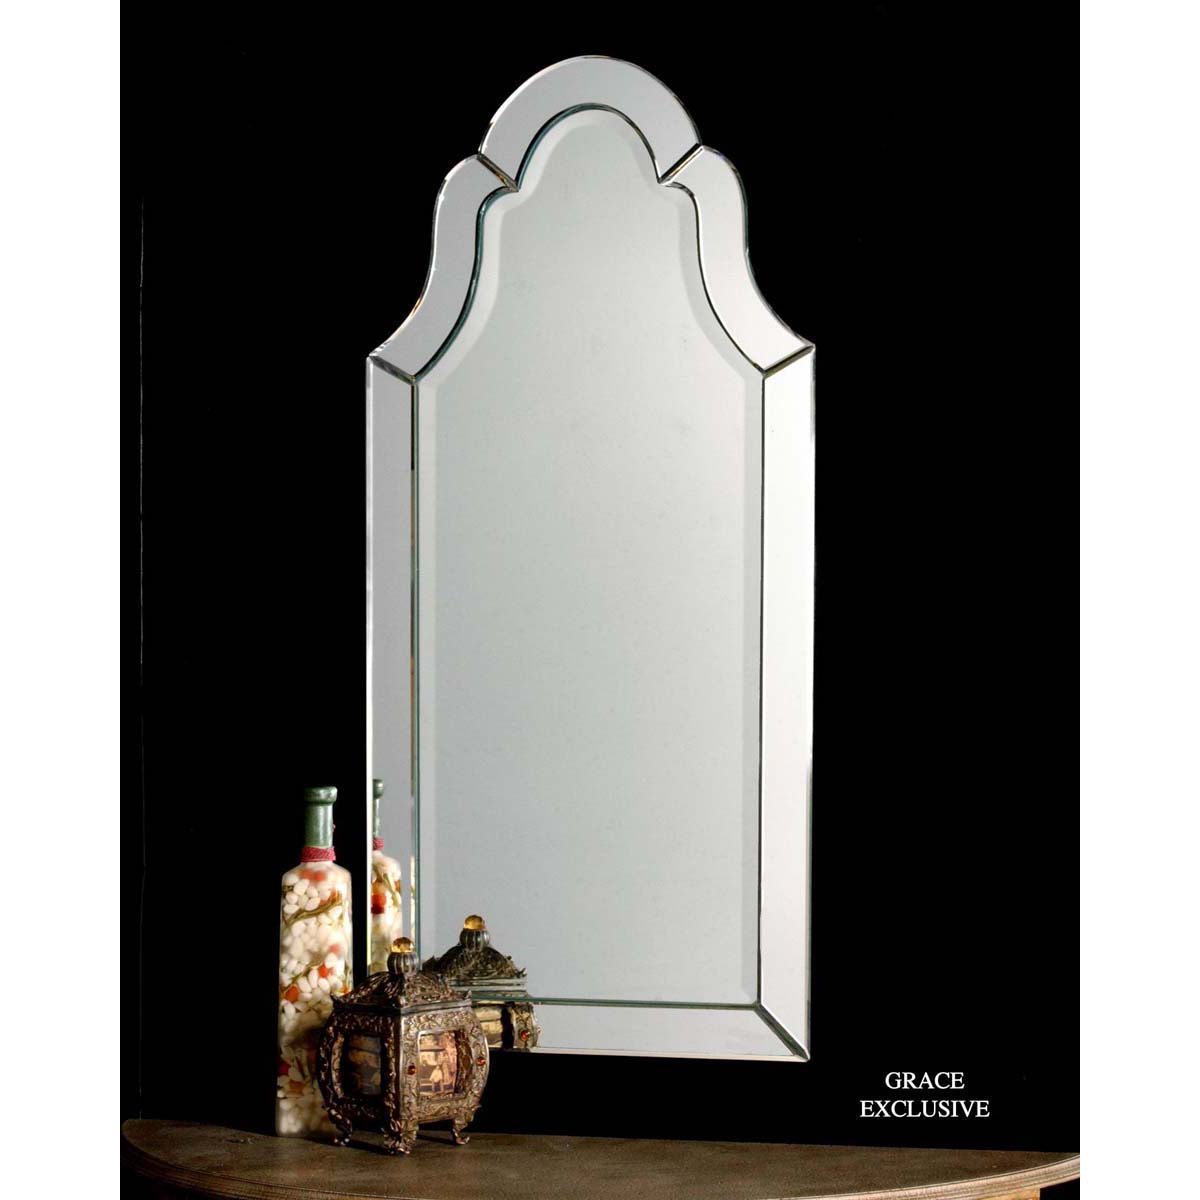 Uttermost Hovan Frameless Arched Mirror